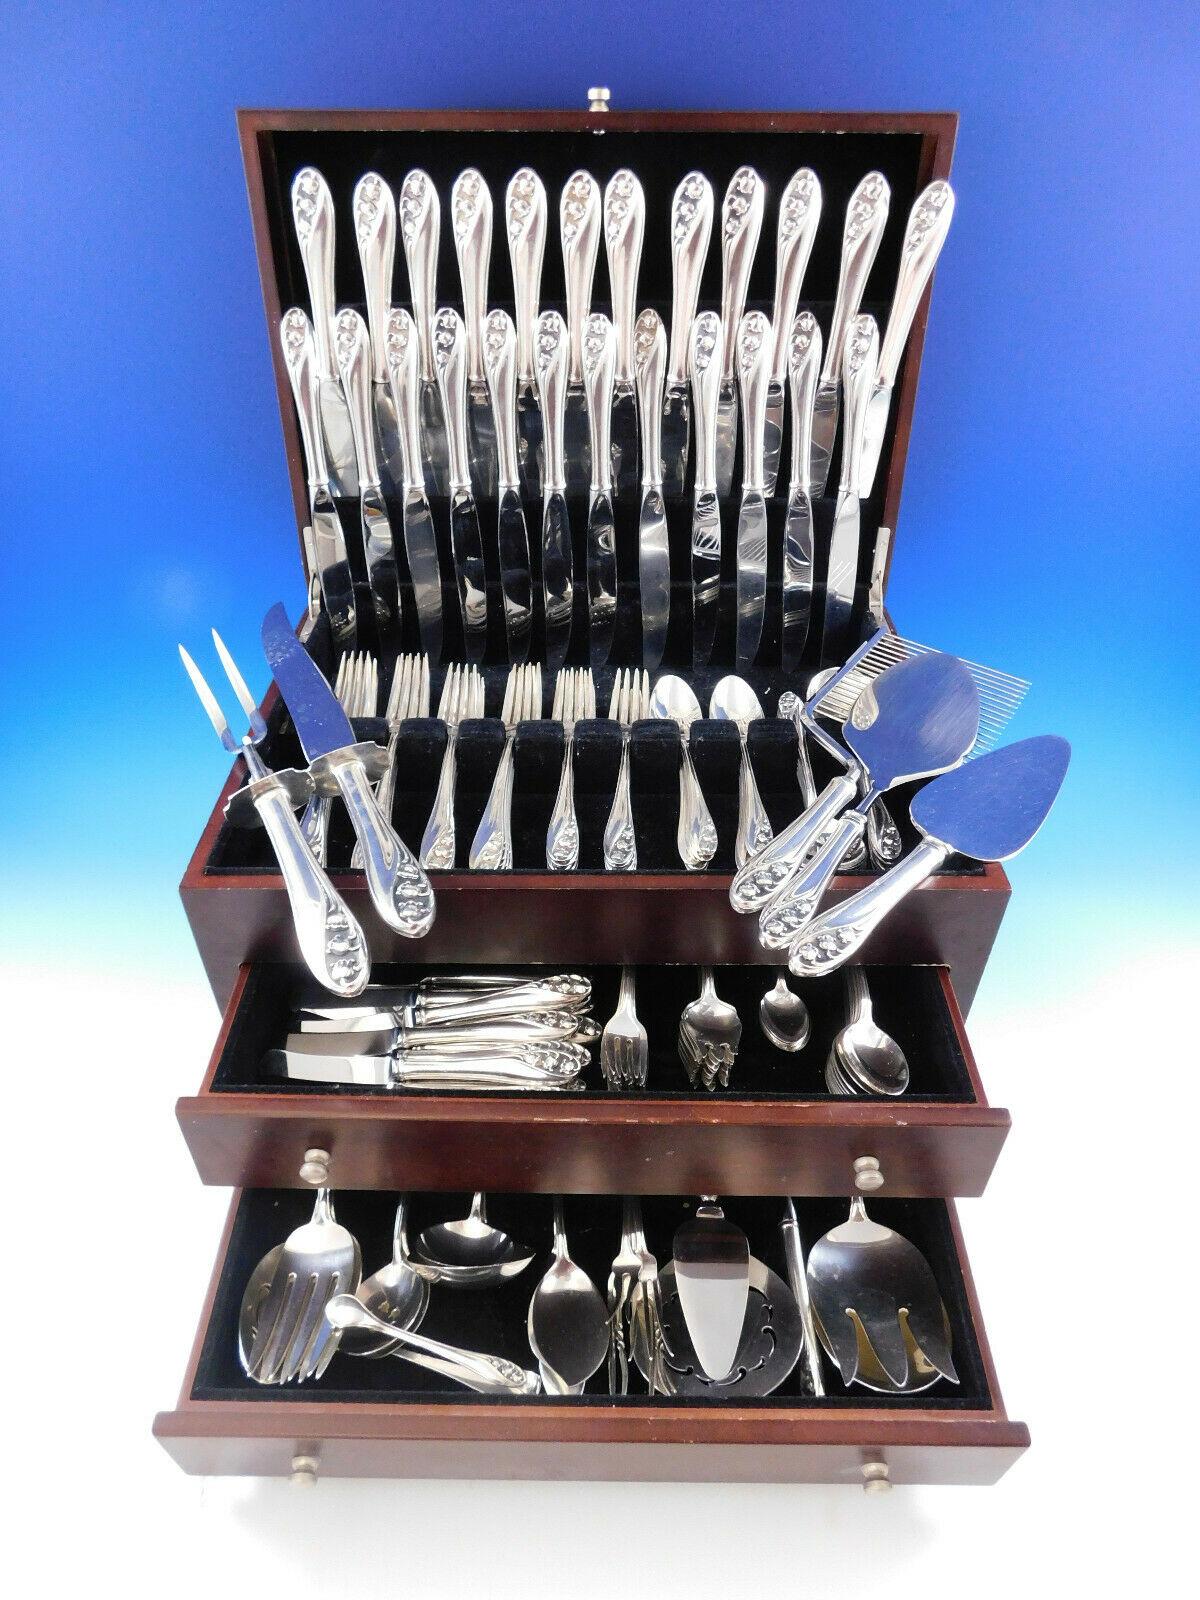 Monumental Dinner & Luncheon Size Lily of the Valley by Gorham, circa 1950, sterling silver Flatware set, 170 pieces. This service for twelve features the delicate dimensional blooms of lily of the valley flowers along the top of the handles. This